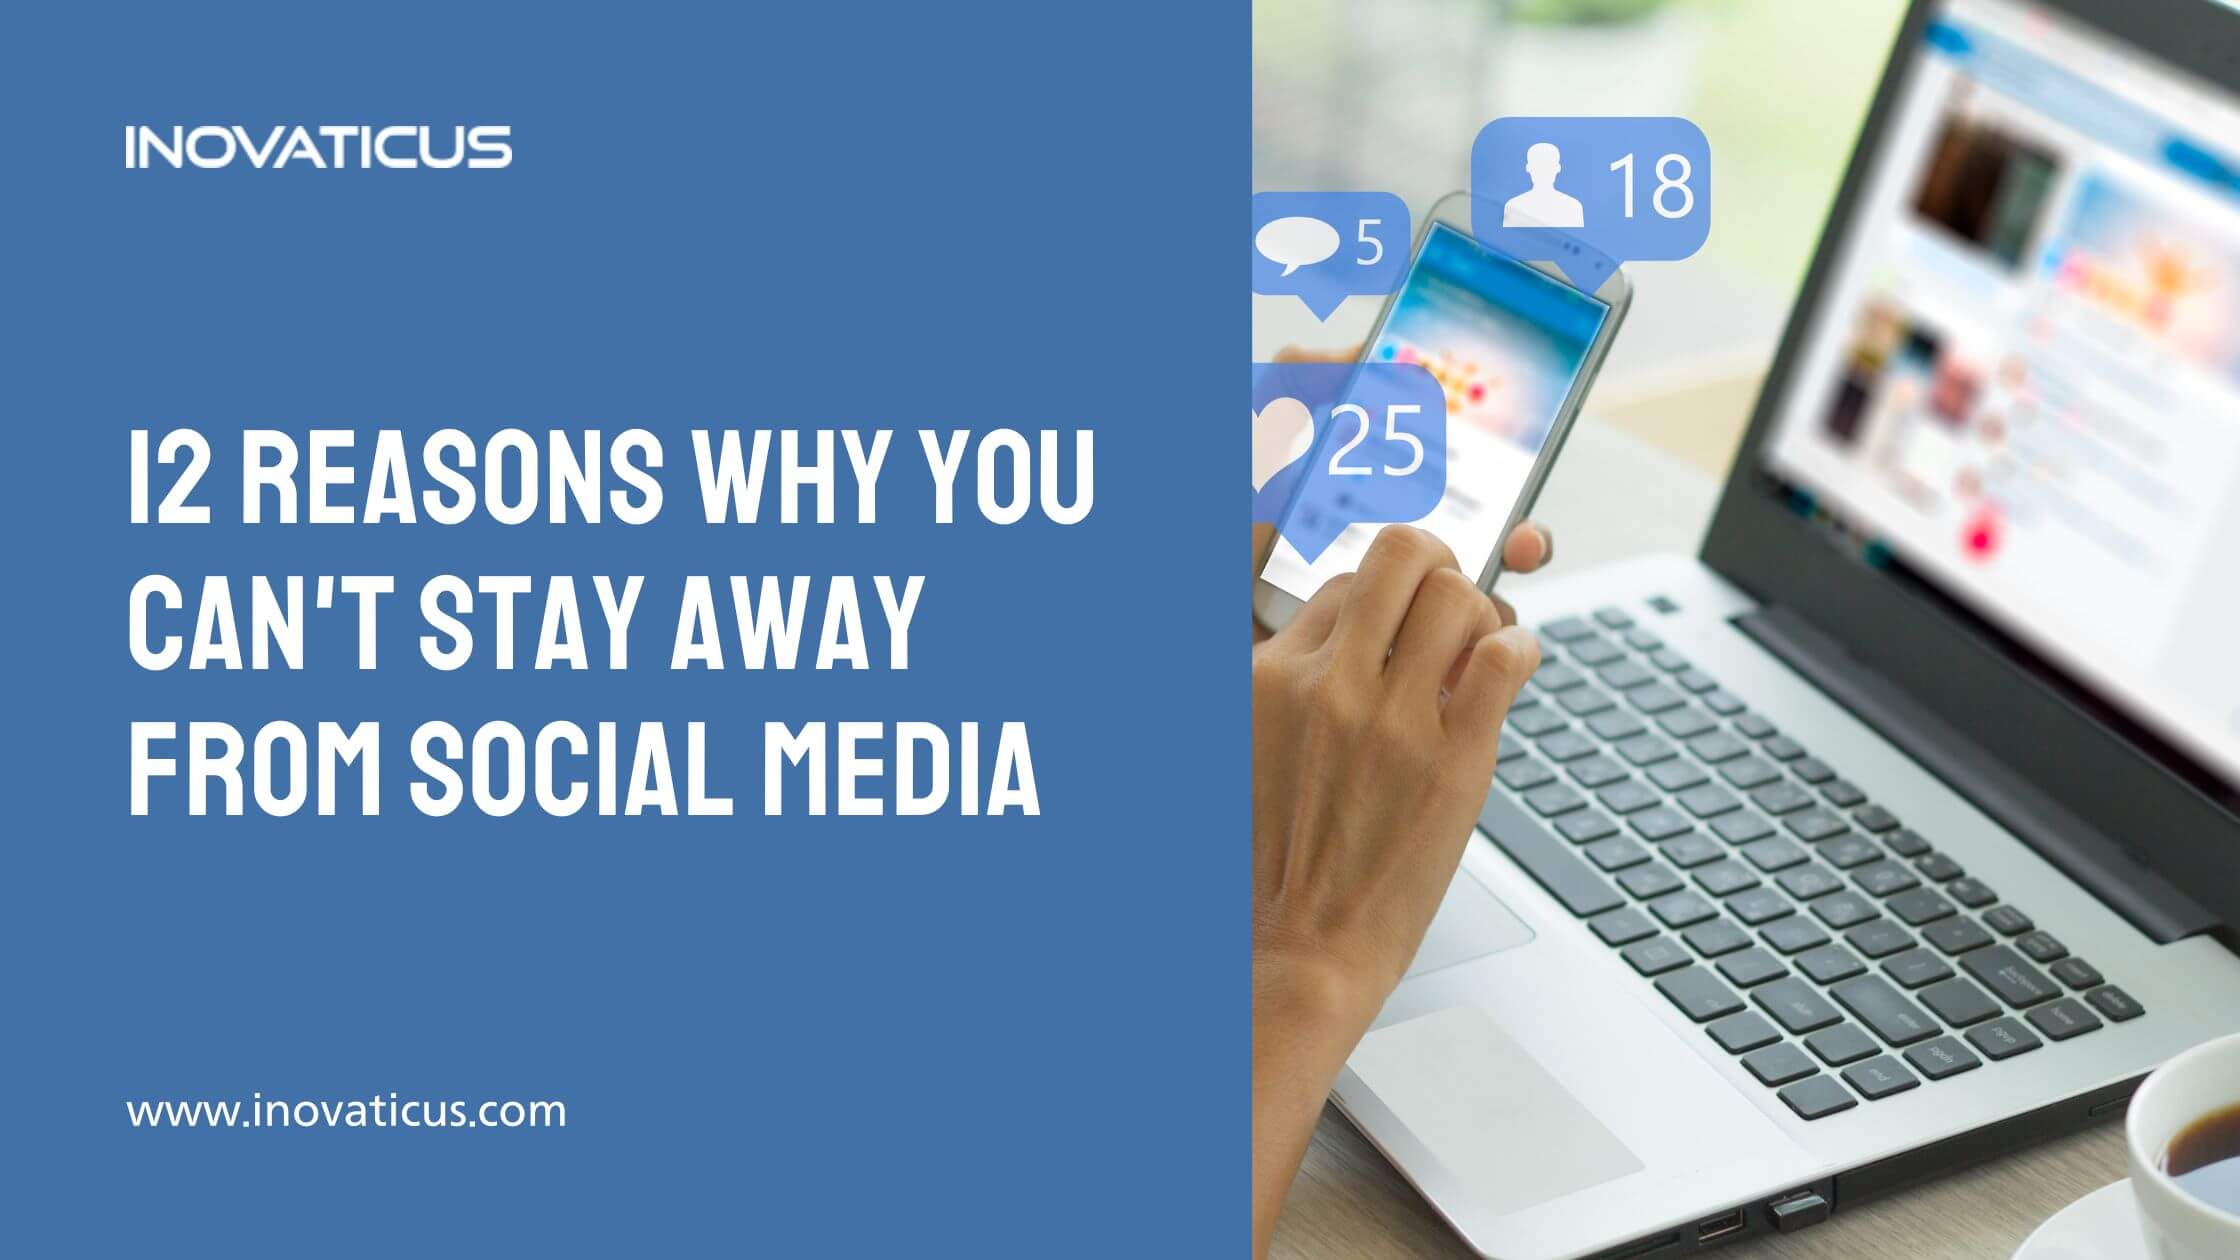 12 Reasons Why You Can't Stay Away From Social Media